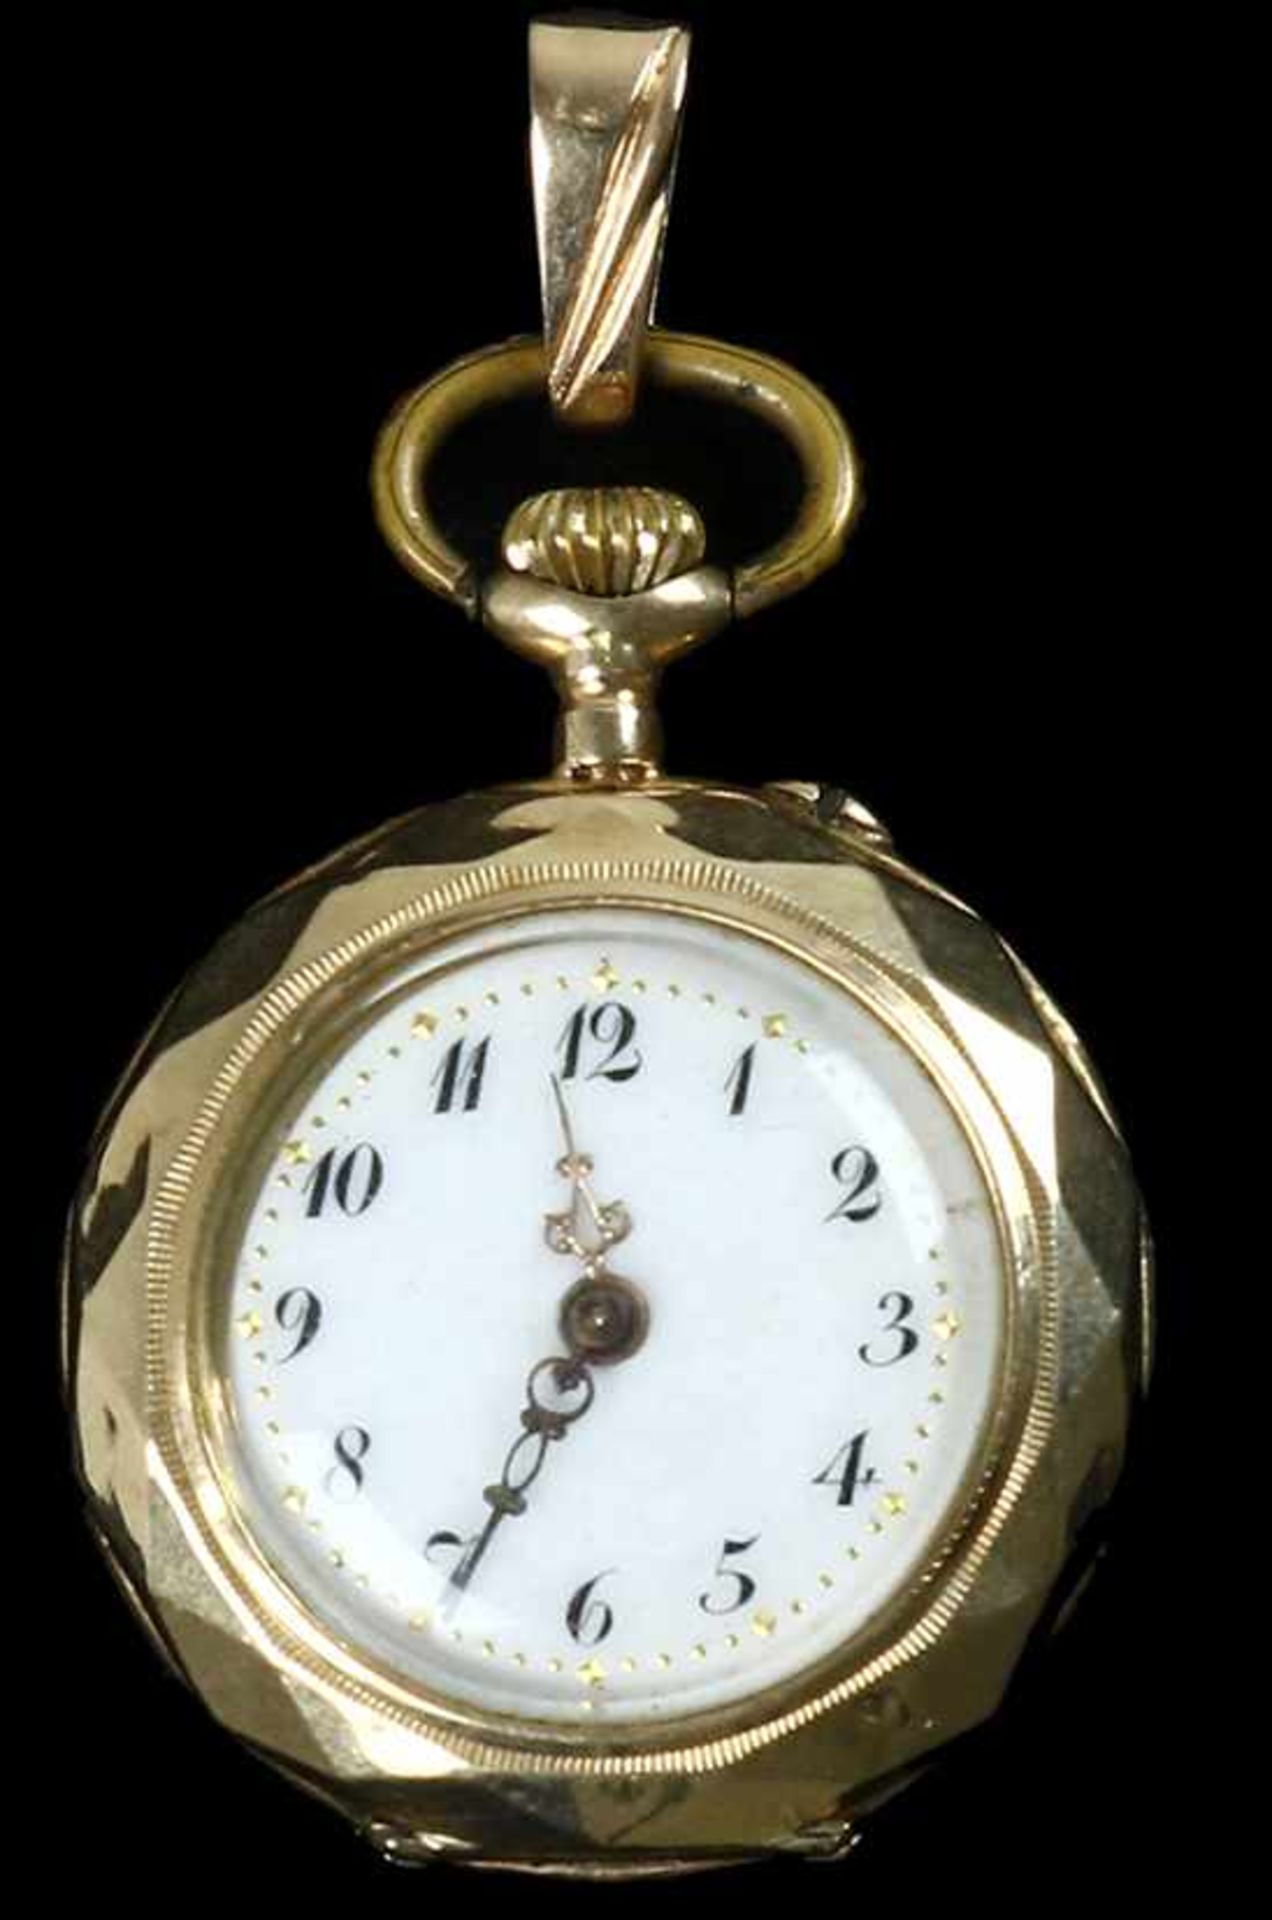 14k rose gold ladies pocket watch, with white enamel dial and engraved back - 26 mm